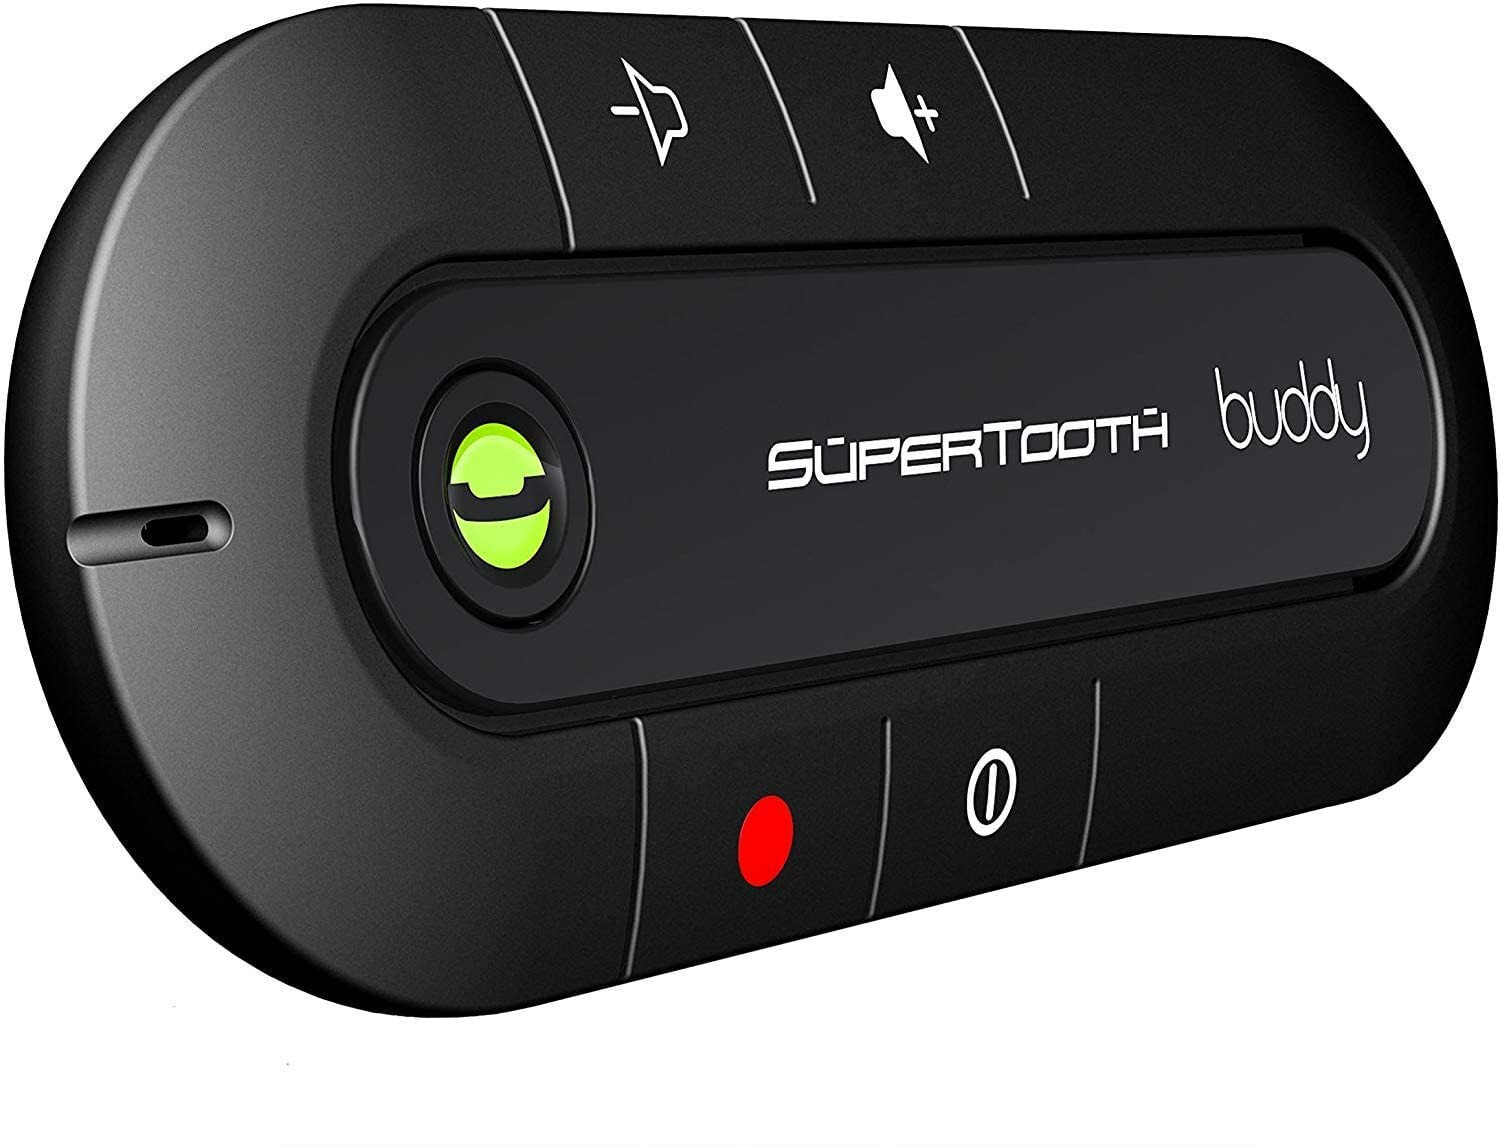 SuperTooth Buddy 2.1 Hands-Free Kit with Bluetooth Suction Cup Mount for iPhone 3G/3GS/4/4S/5/5S/5C and Samsung Galaxy S3/S4 - Black